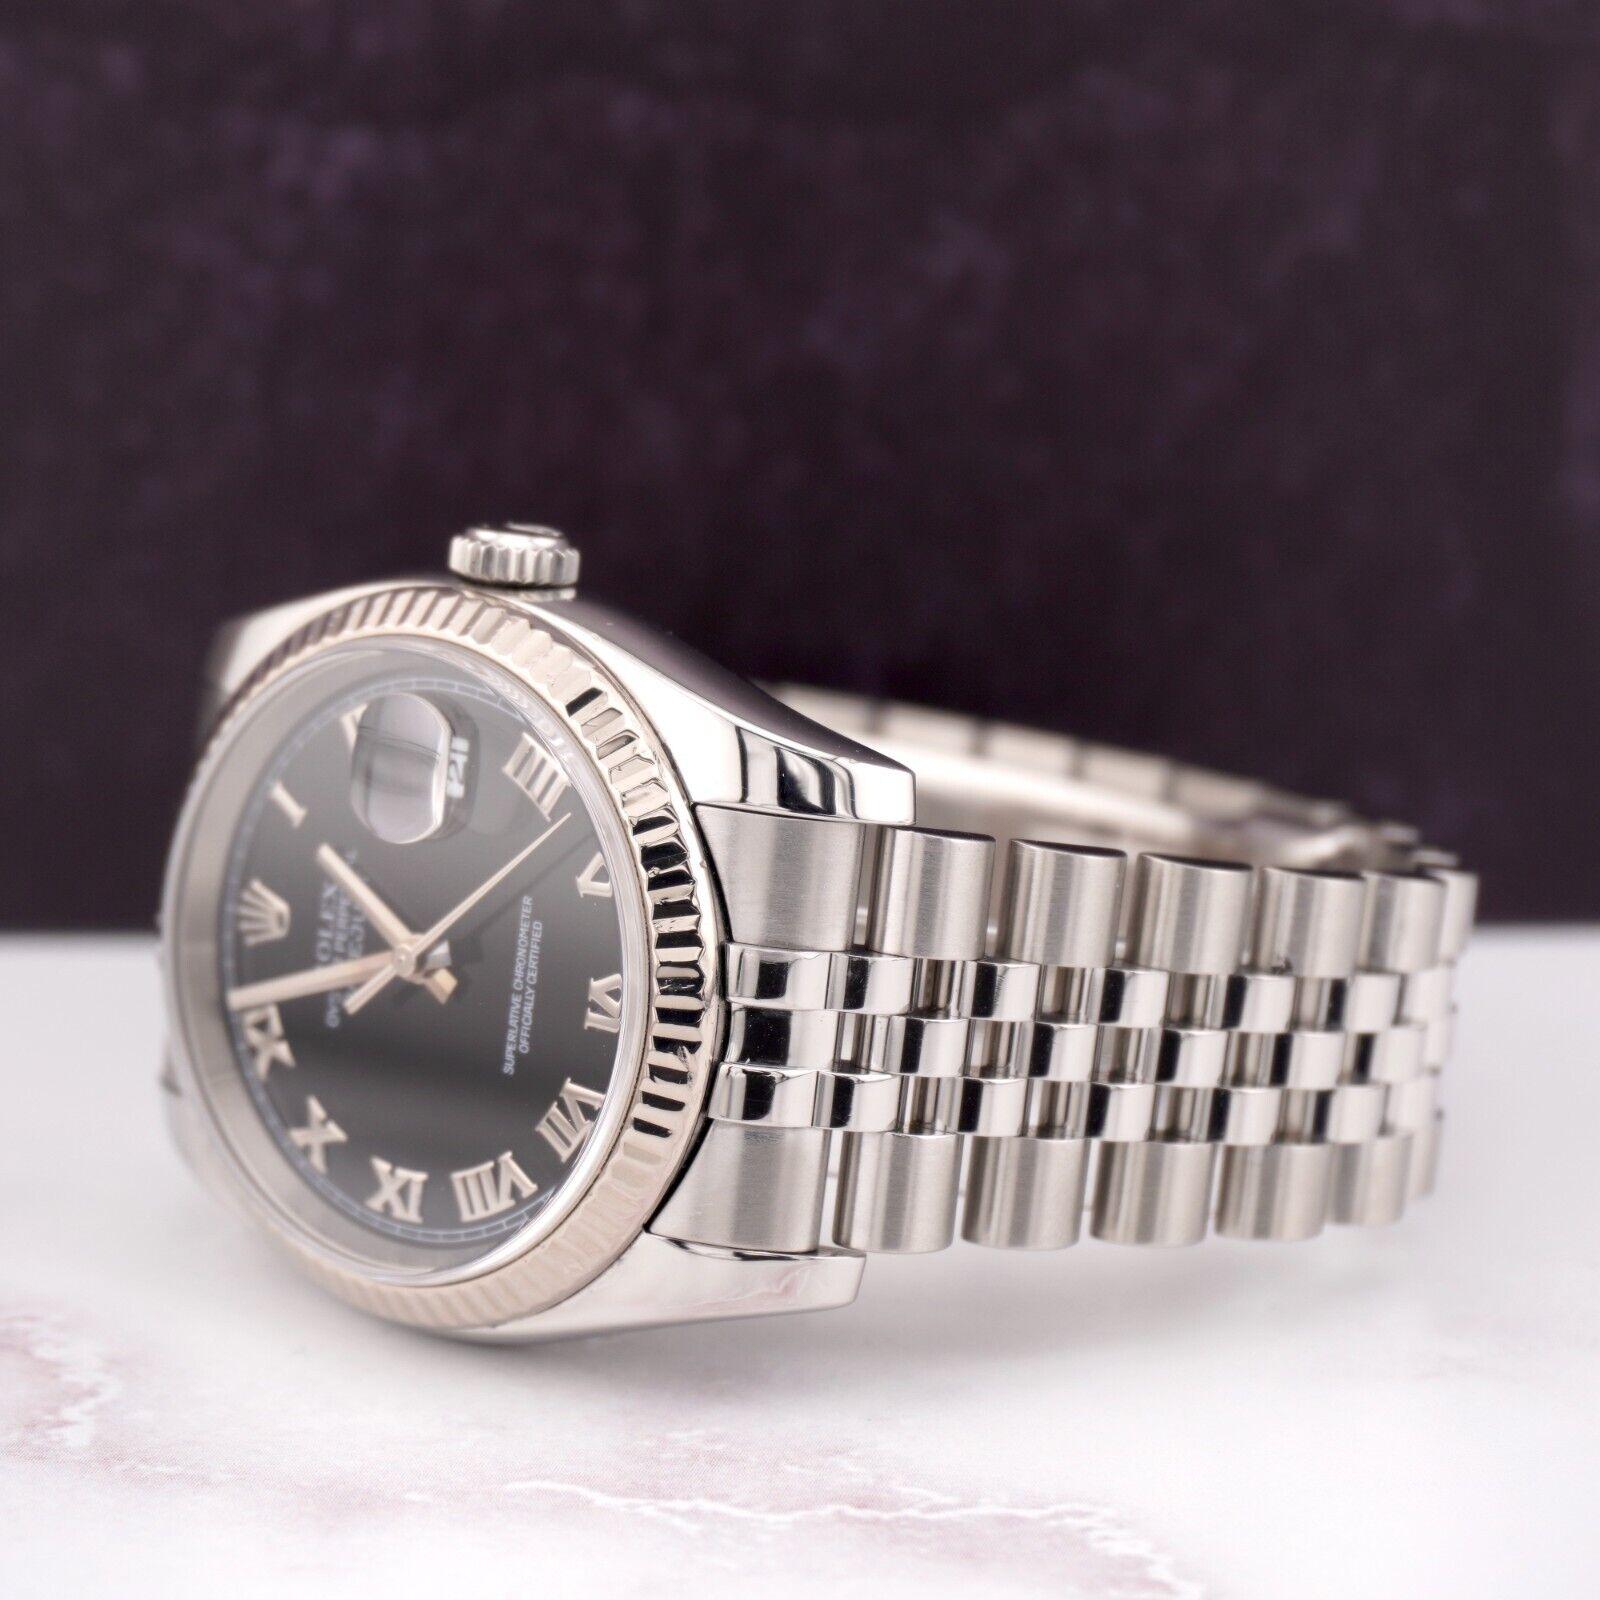 Rolex Datejust 36mm Watch. A Pre-owned watch w/ Original Box and 2006 Papers. Watch is 100% Authentic and Comes with Authenticity Card. Watch Reference is 116234 and is in Excellent Condition (See Pictures). The dial color is Black and material is